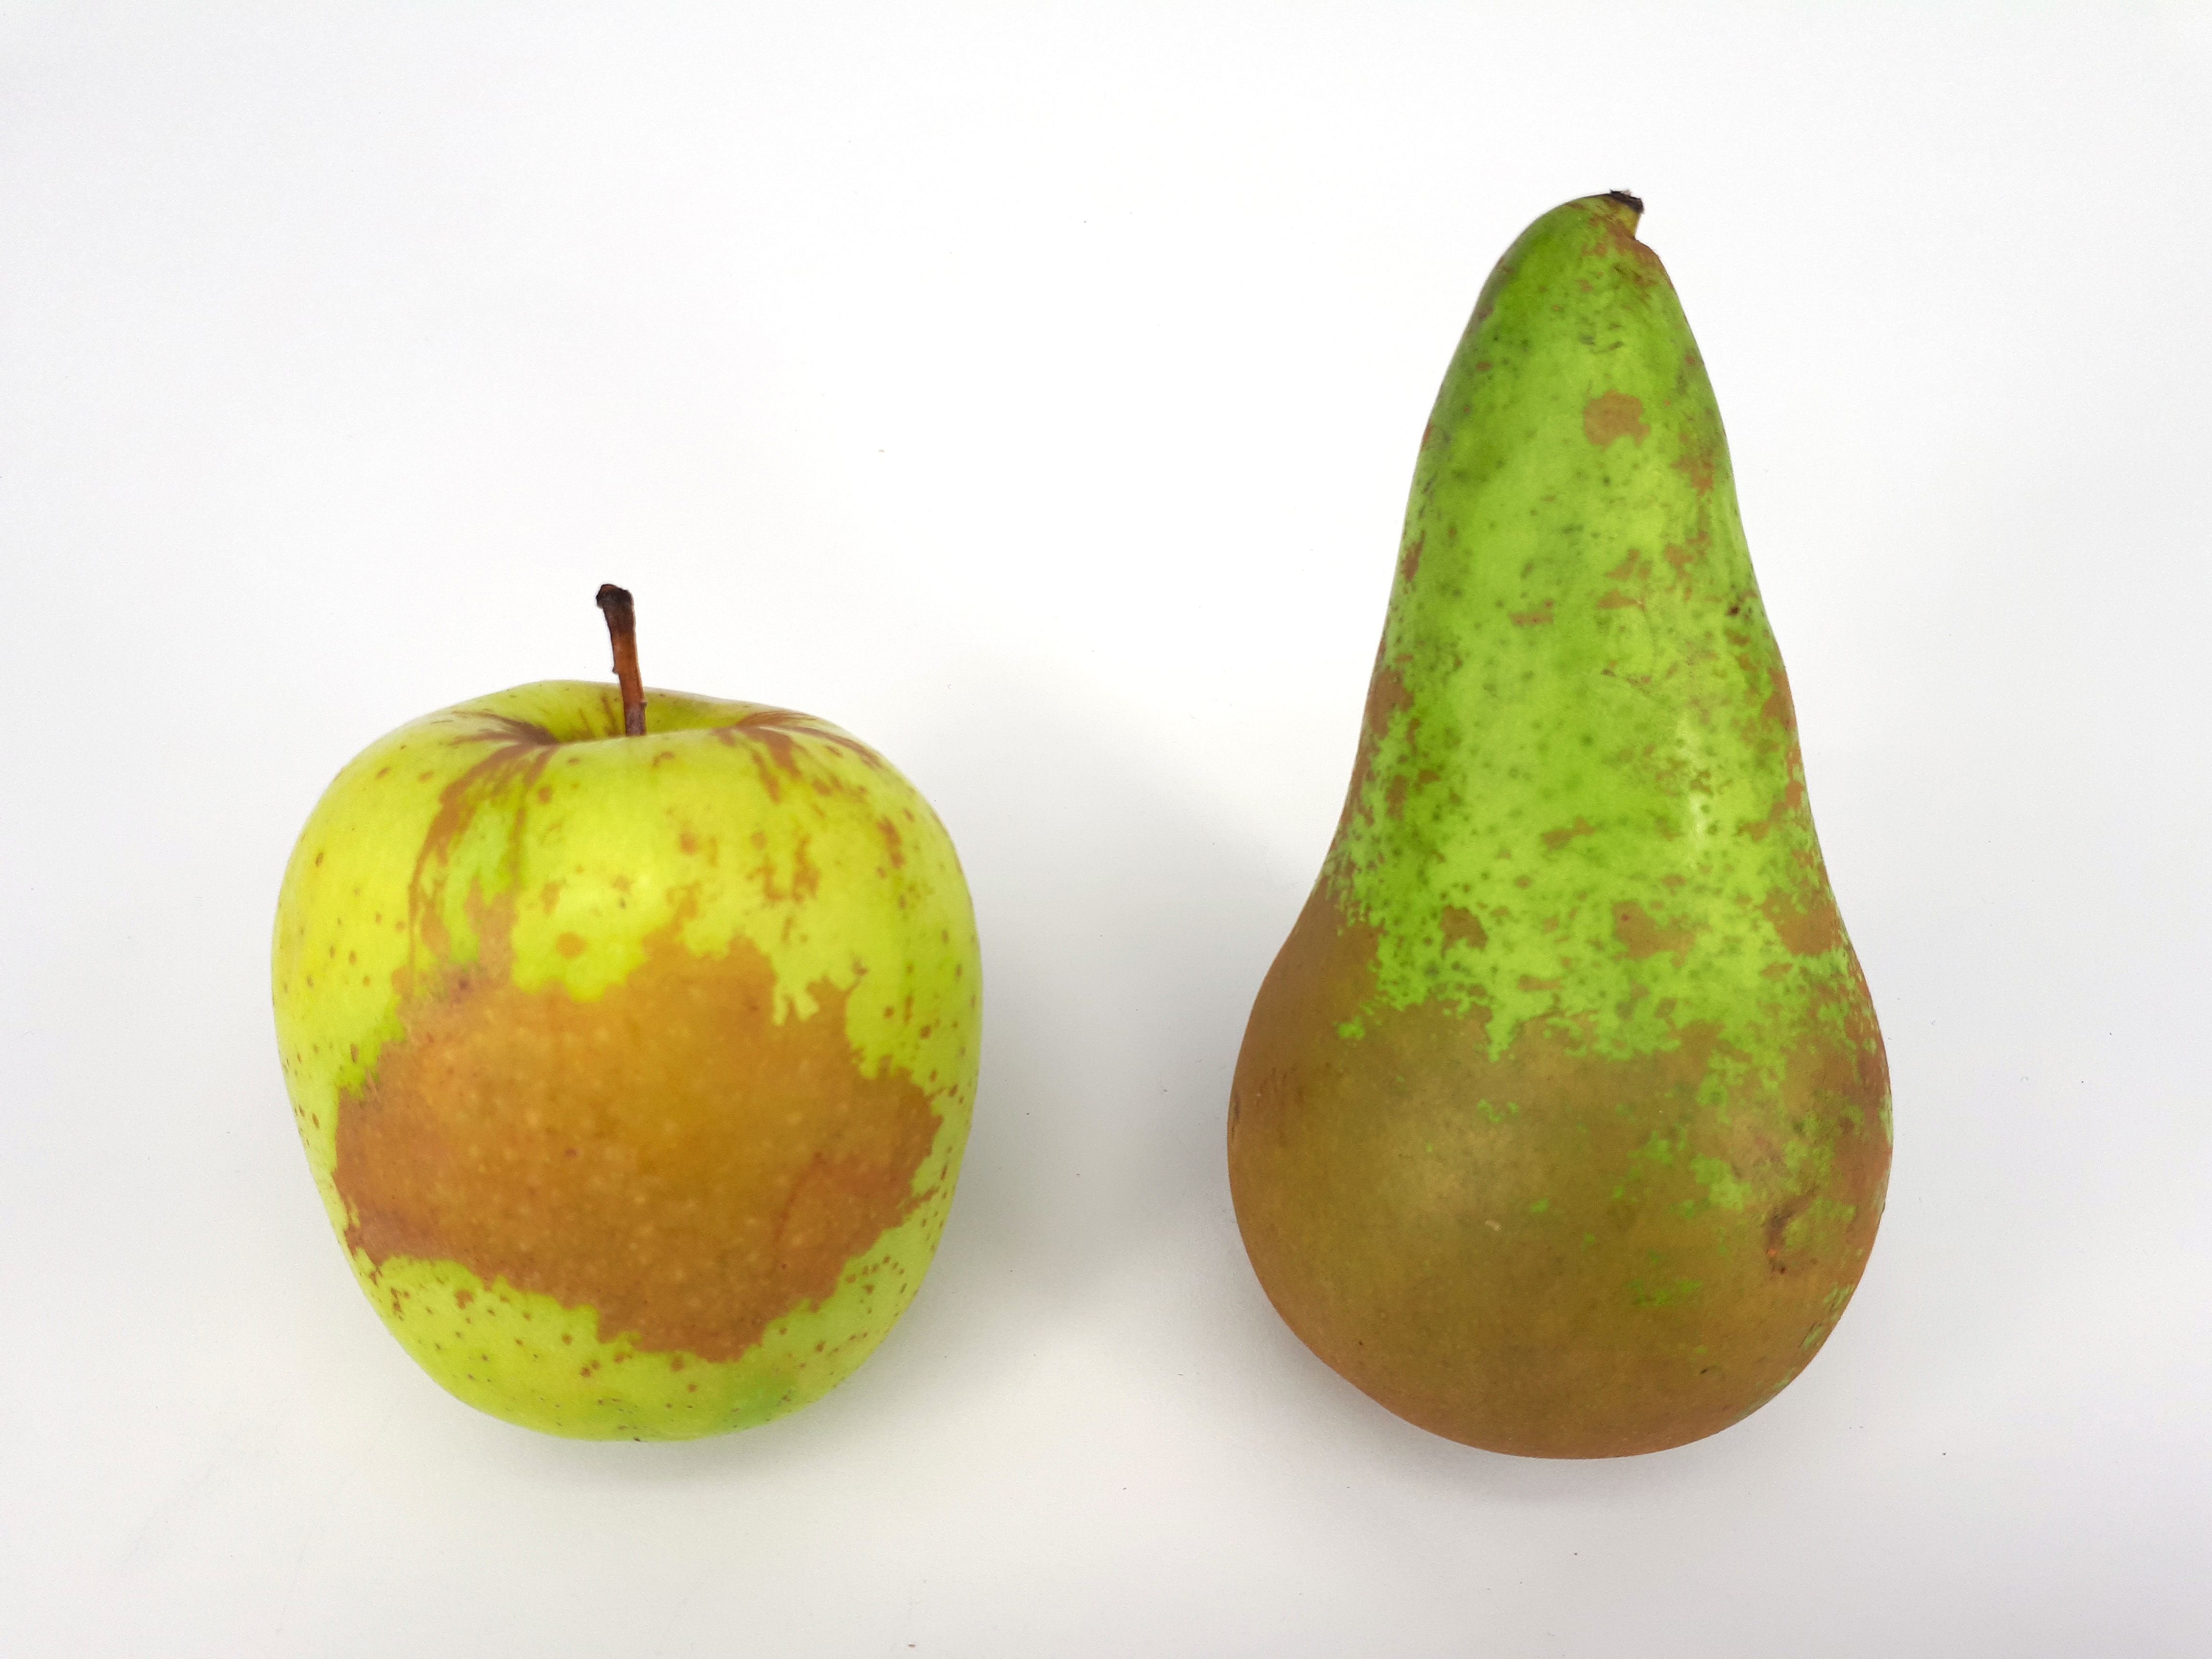 2 x Russetted fruit - Apple - Pear - 2017 D